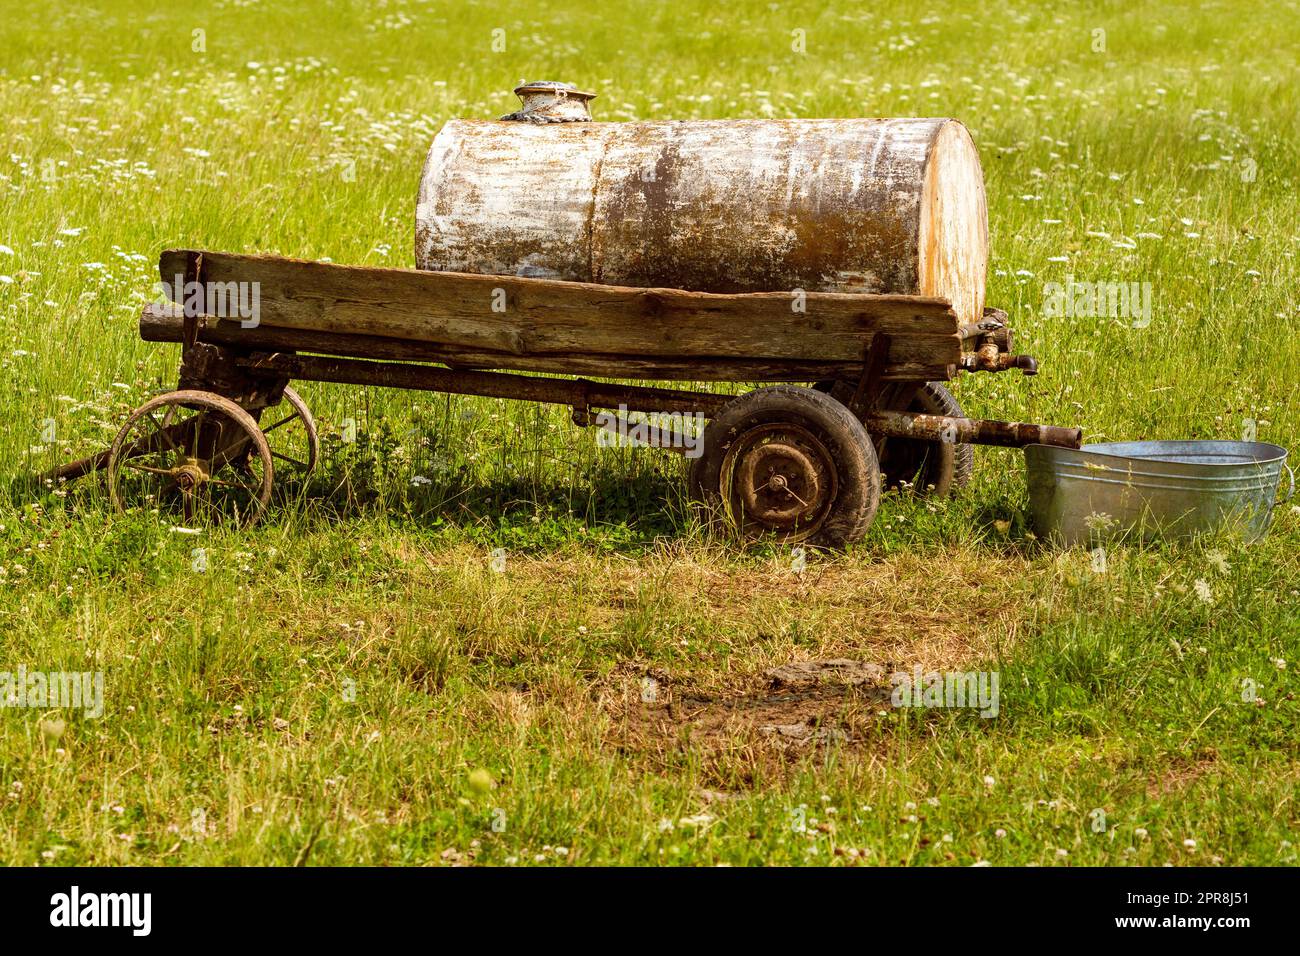 Old mobile water tank for watering grazing cattle in a pasture Stock Photo